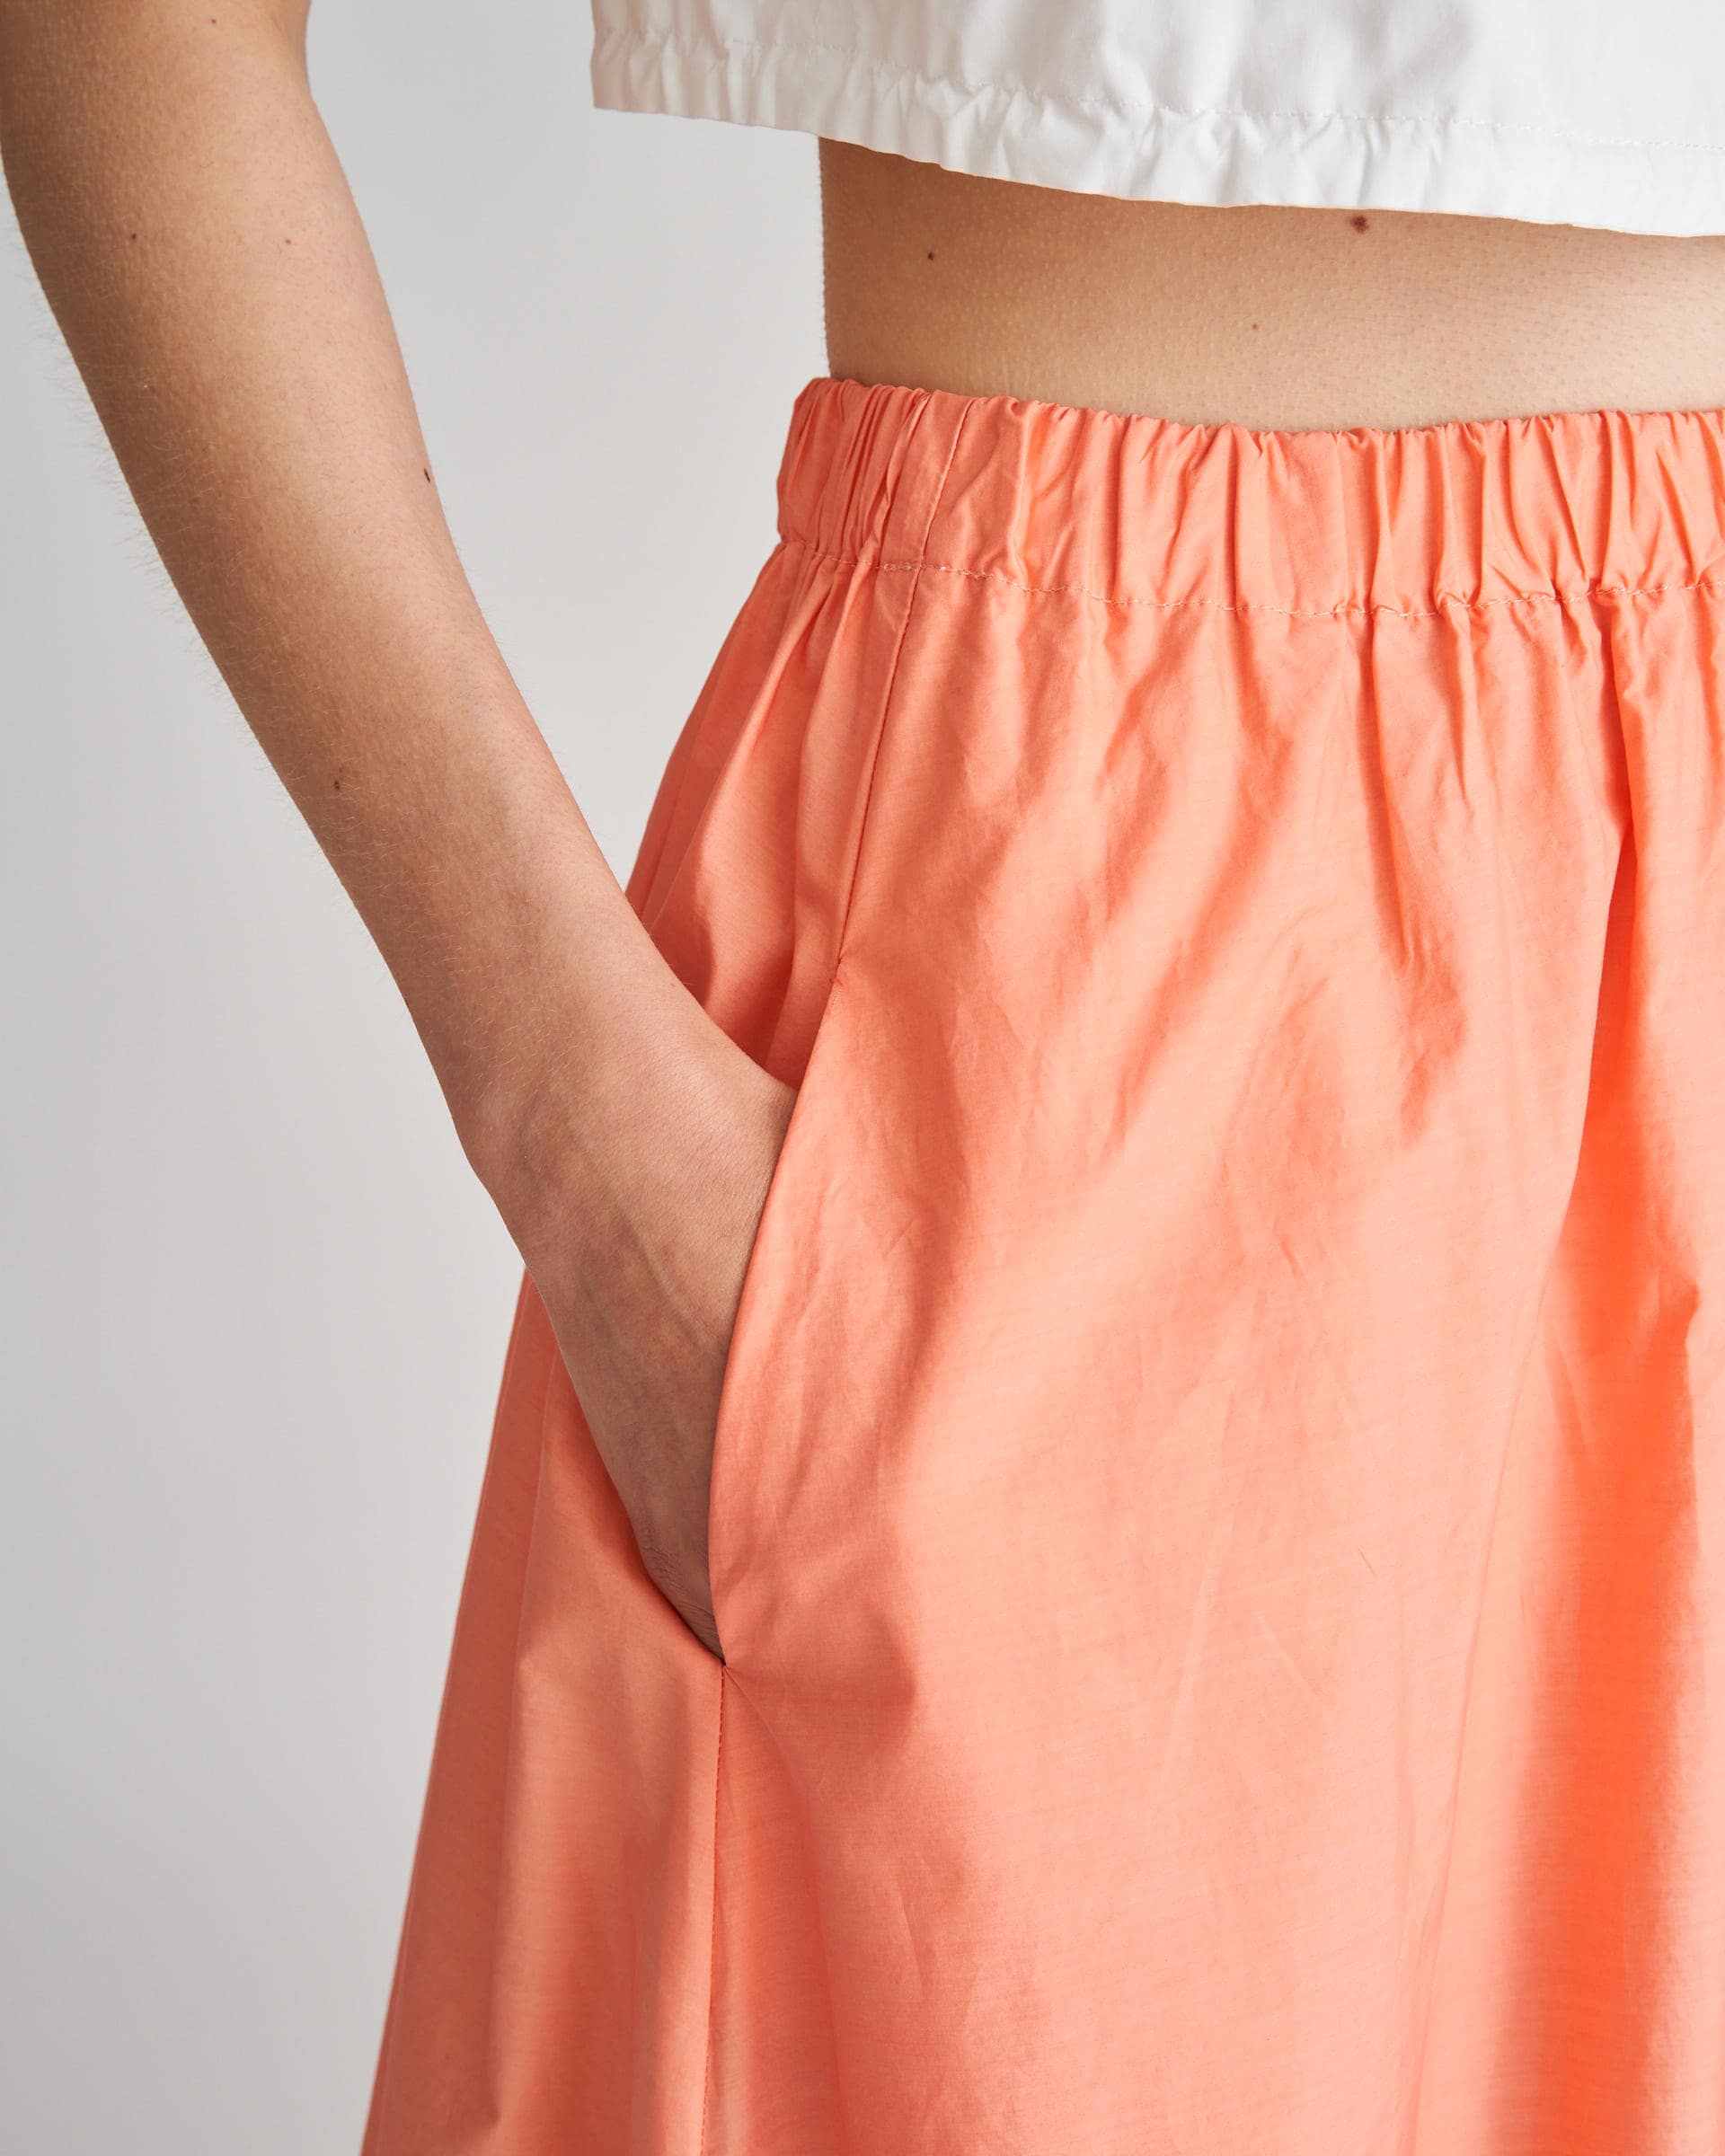 The Market Store | Two-tone Flounce Skirt